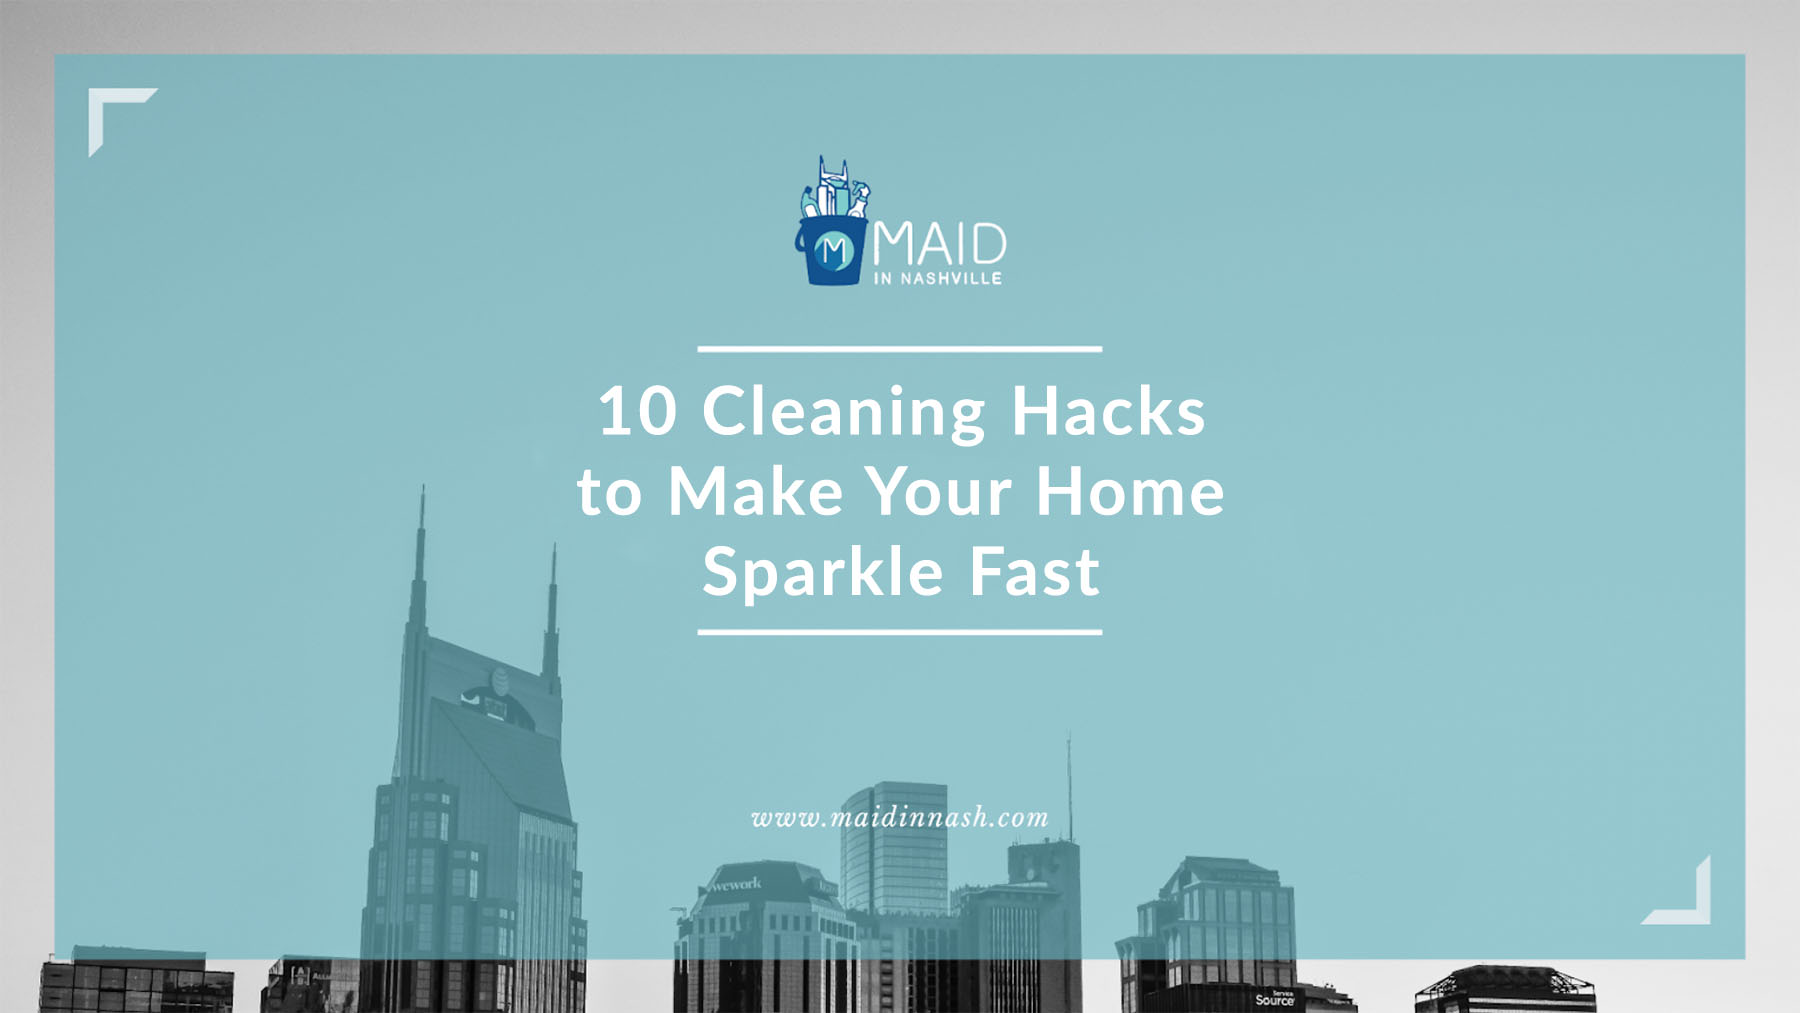 10 Cleaning Hacks to Make Your Home Sparkle Fast